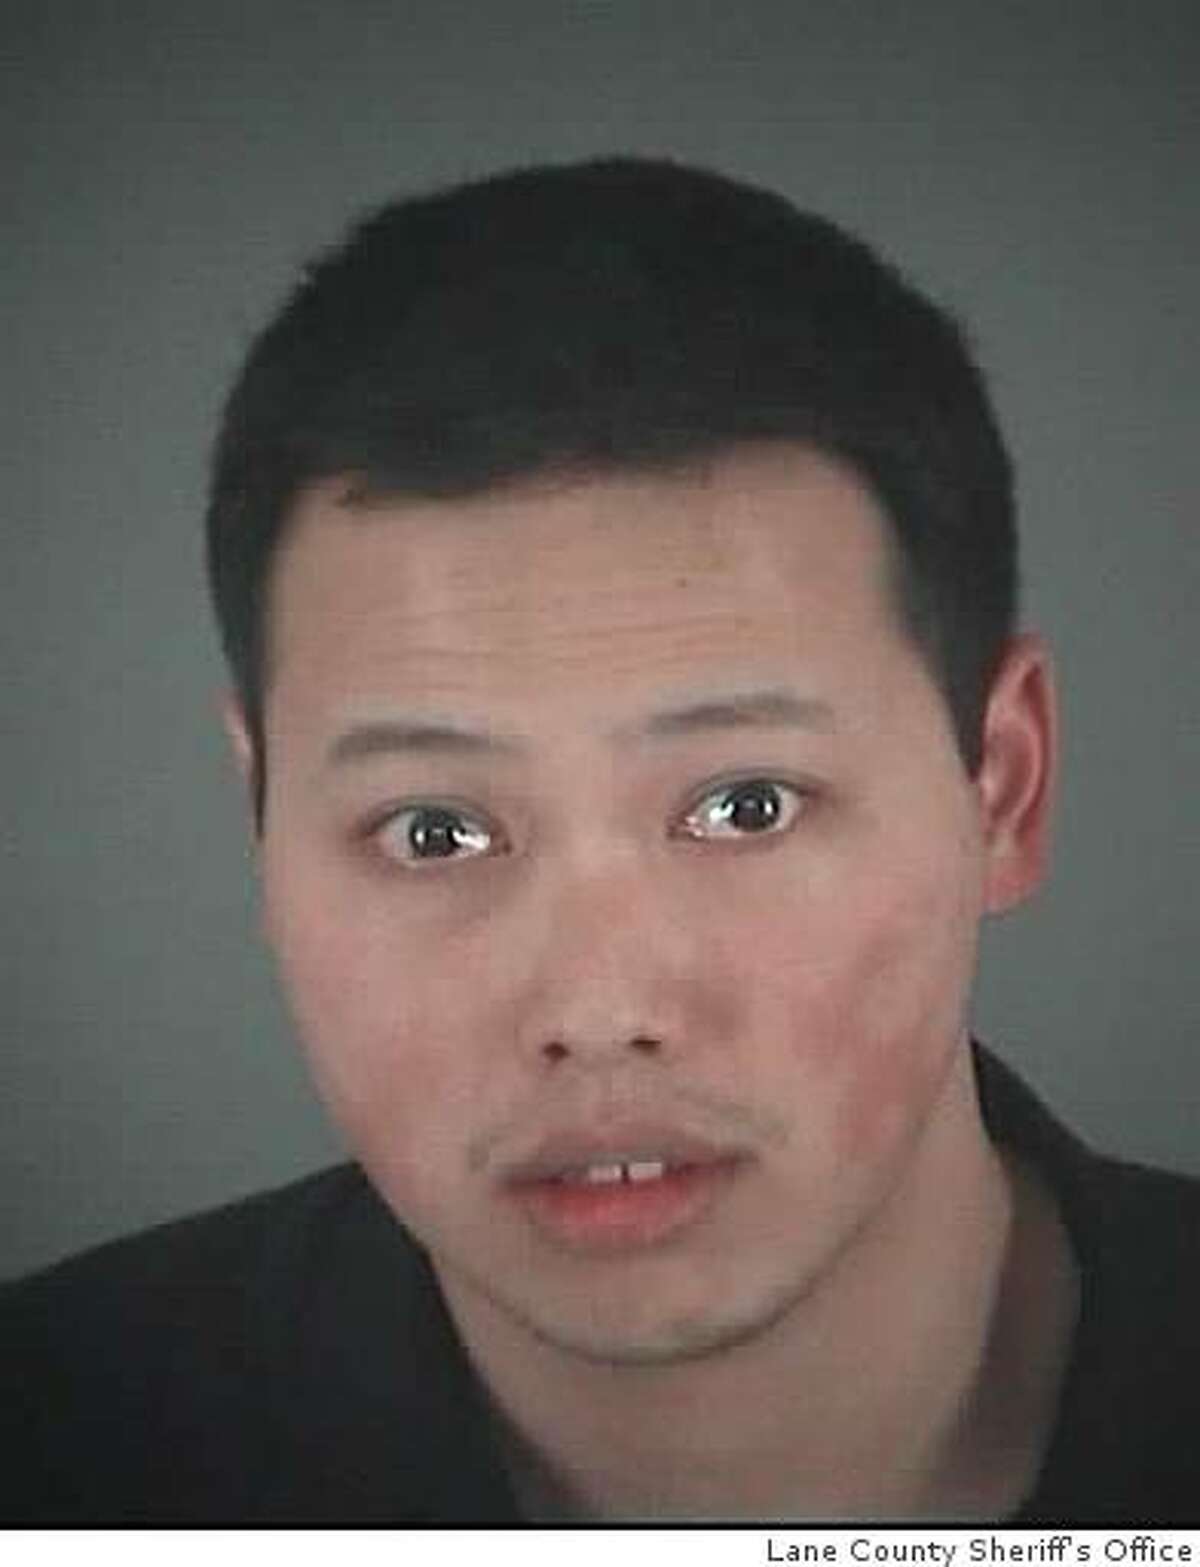 Booking mug for Joseph Hokai Tang for VIOLIN21. Provided by the Lane County Sheriff's Office in Oregon.